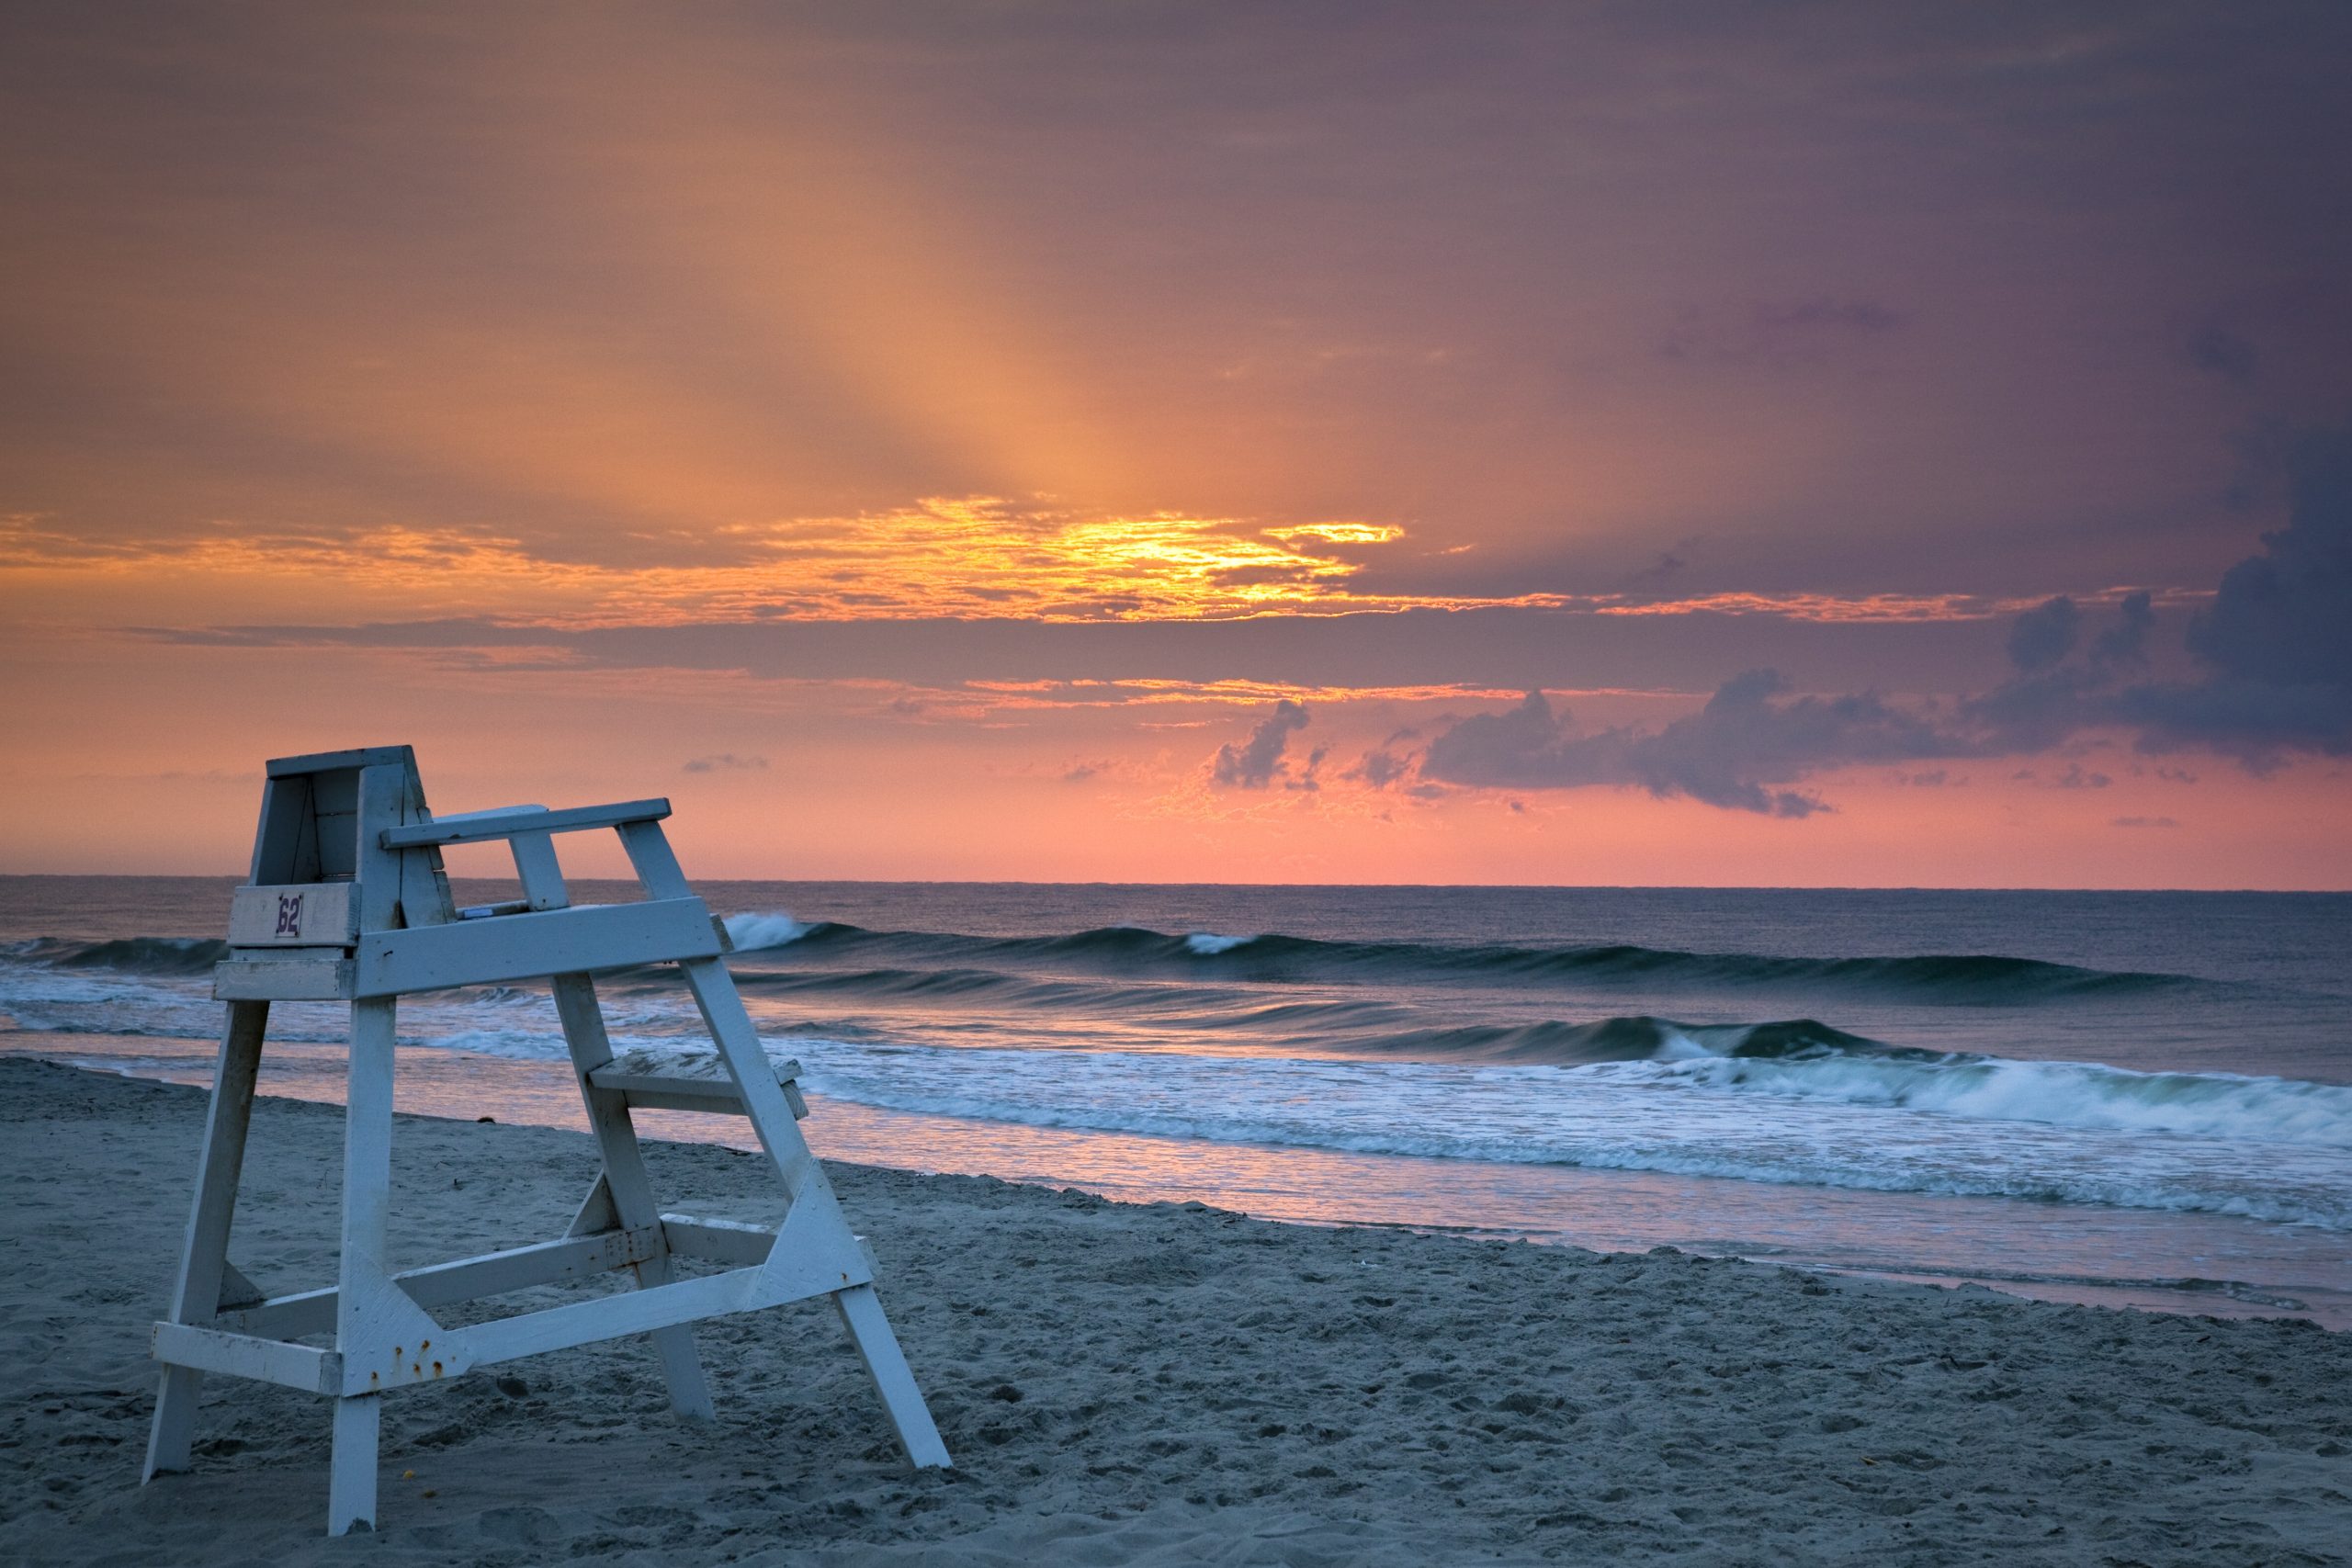 A beautiful sunrise over Myrtle beach with a lifeguard chair on the shore in South Carolina